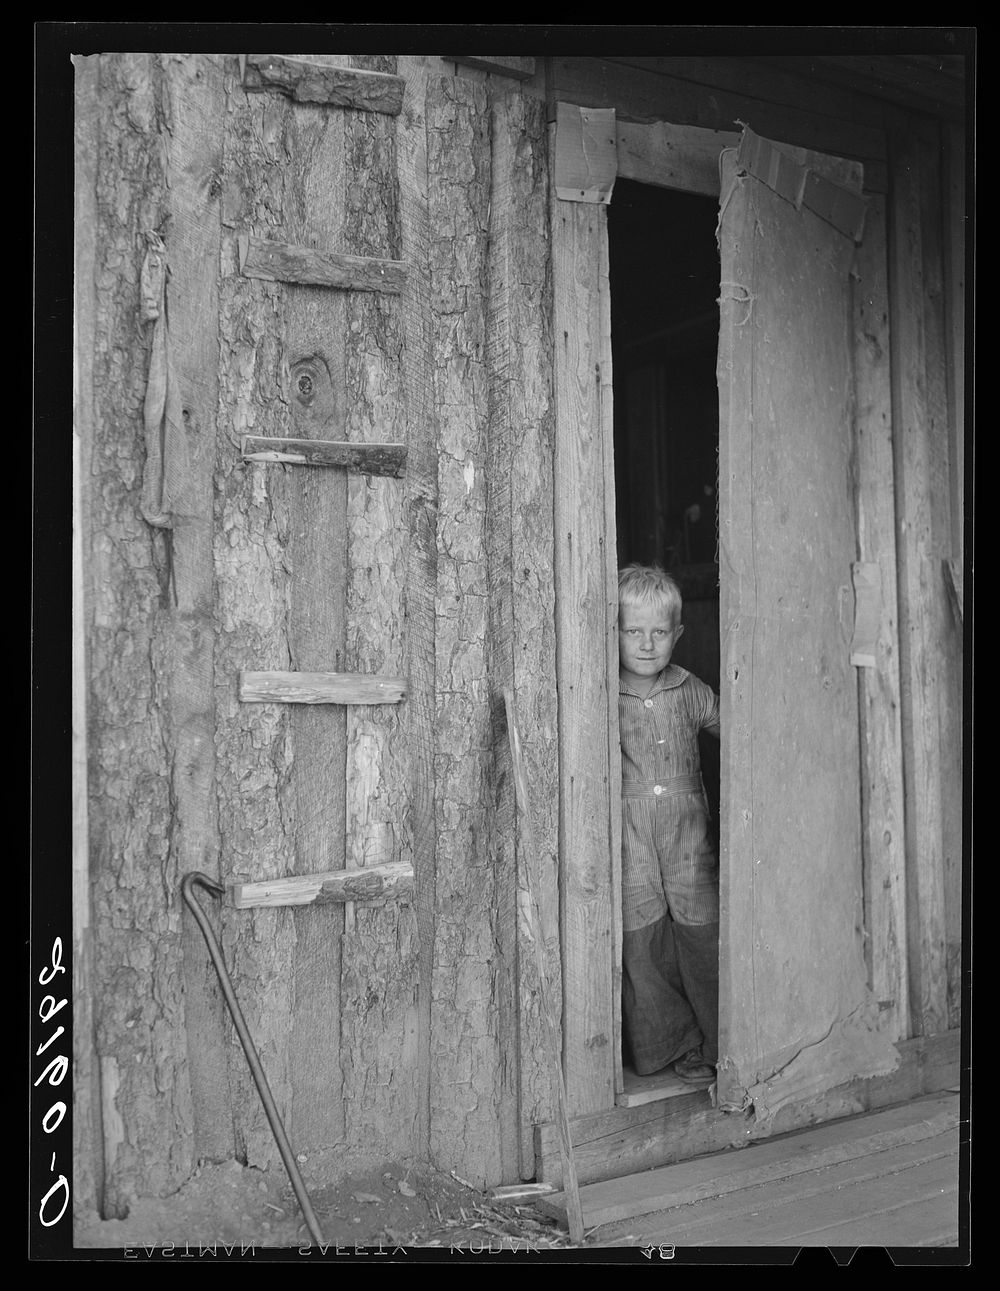 Son of tiff miner. Washington County, Missouri. Sourced from the Library of Congress.